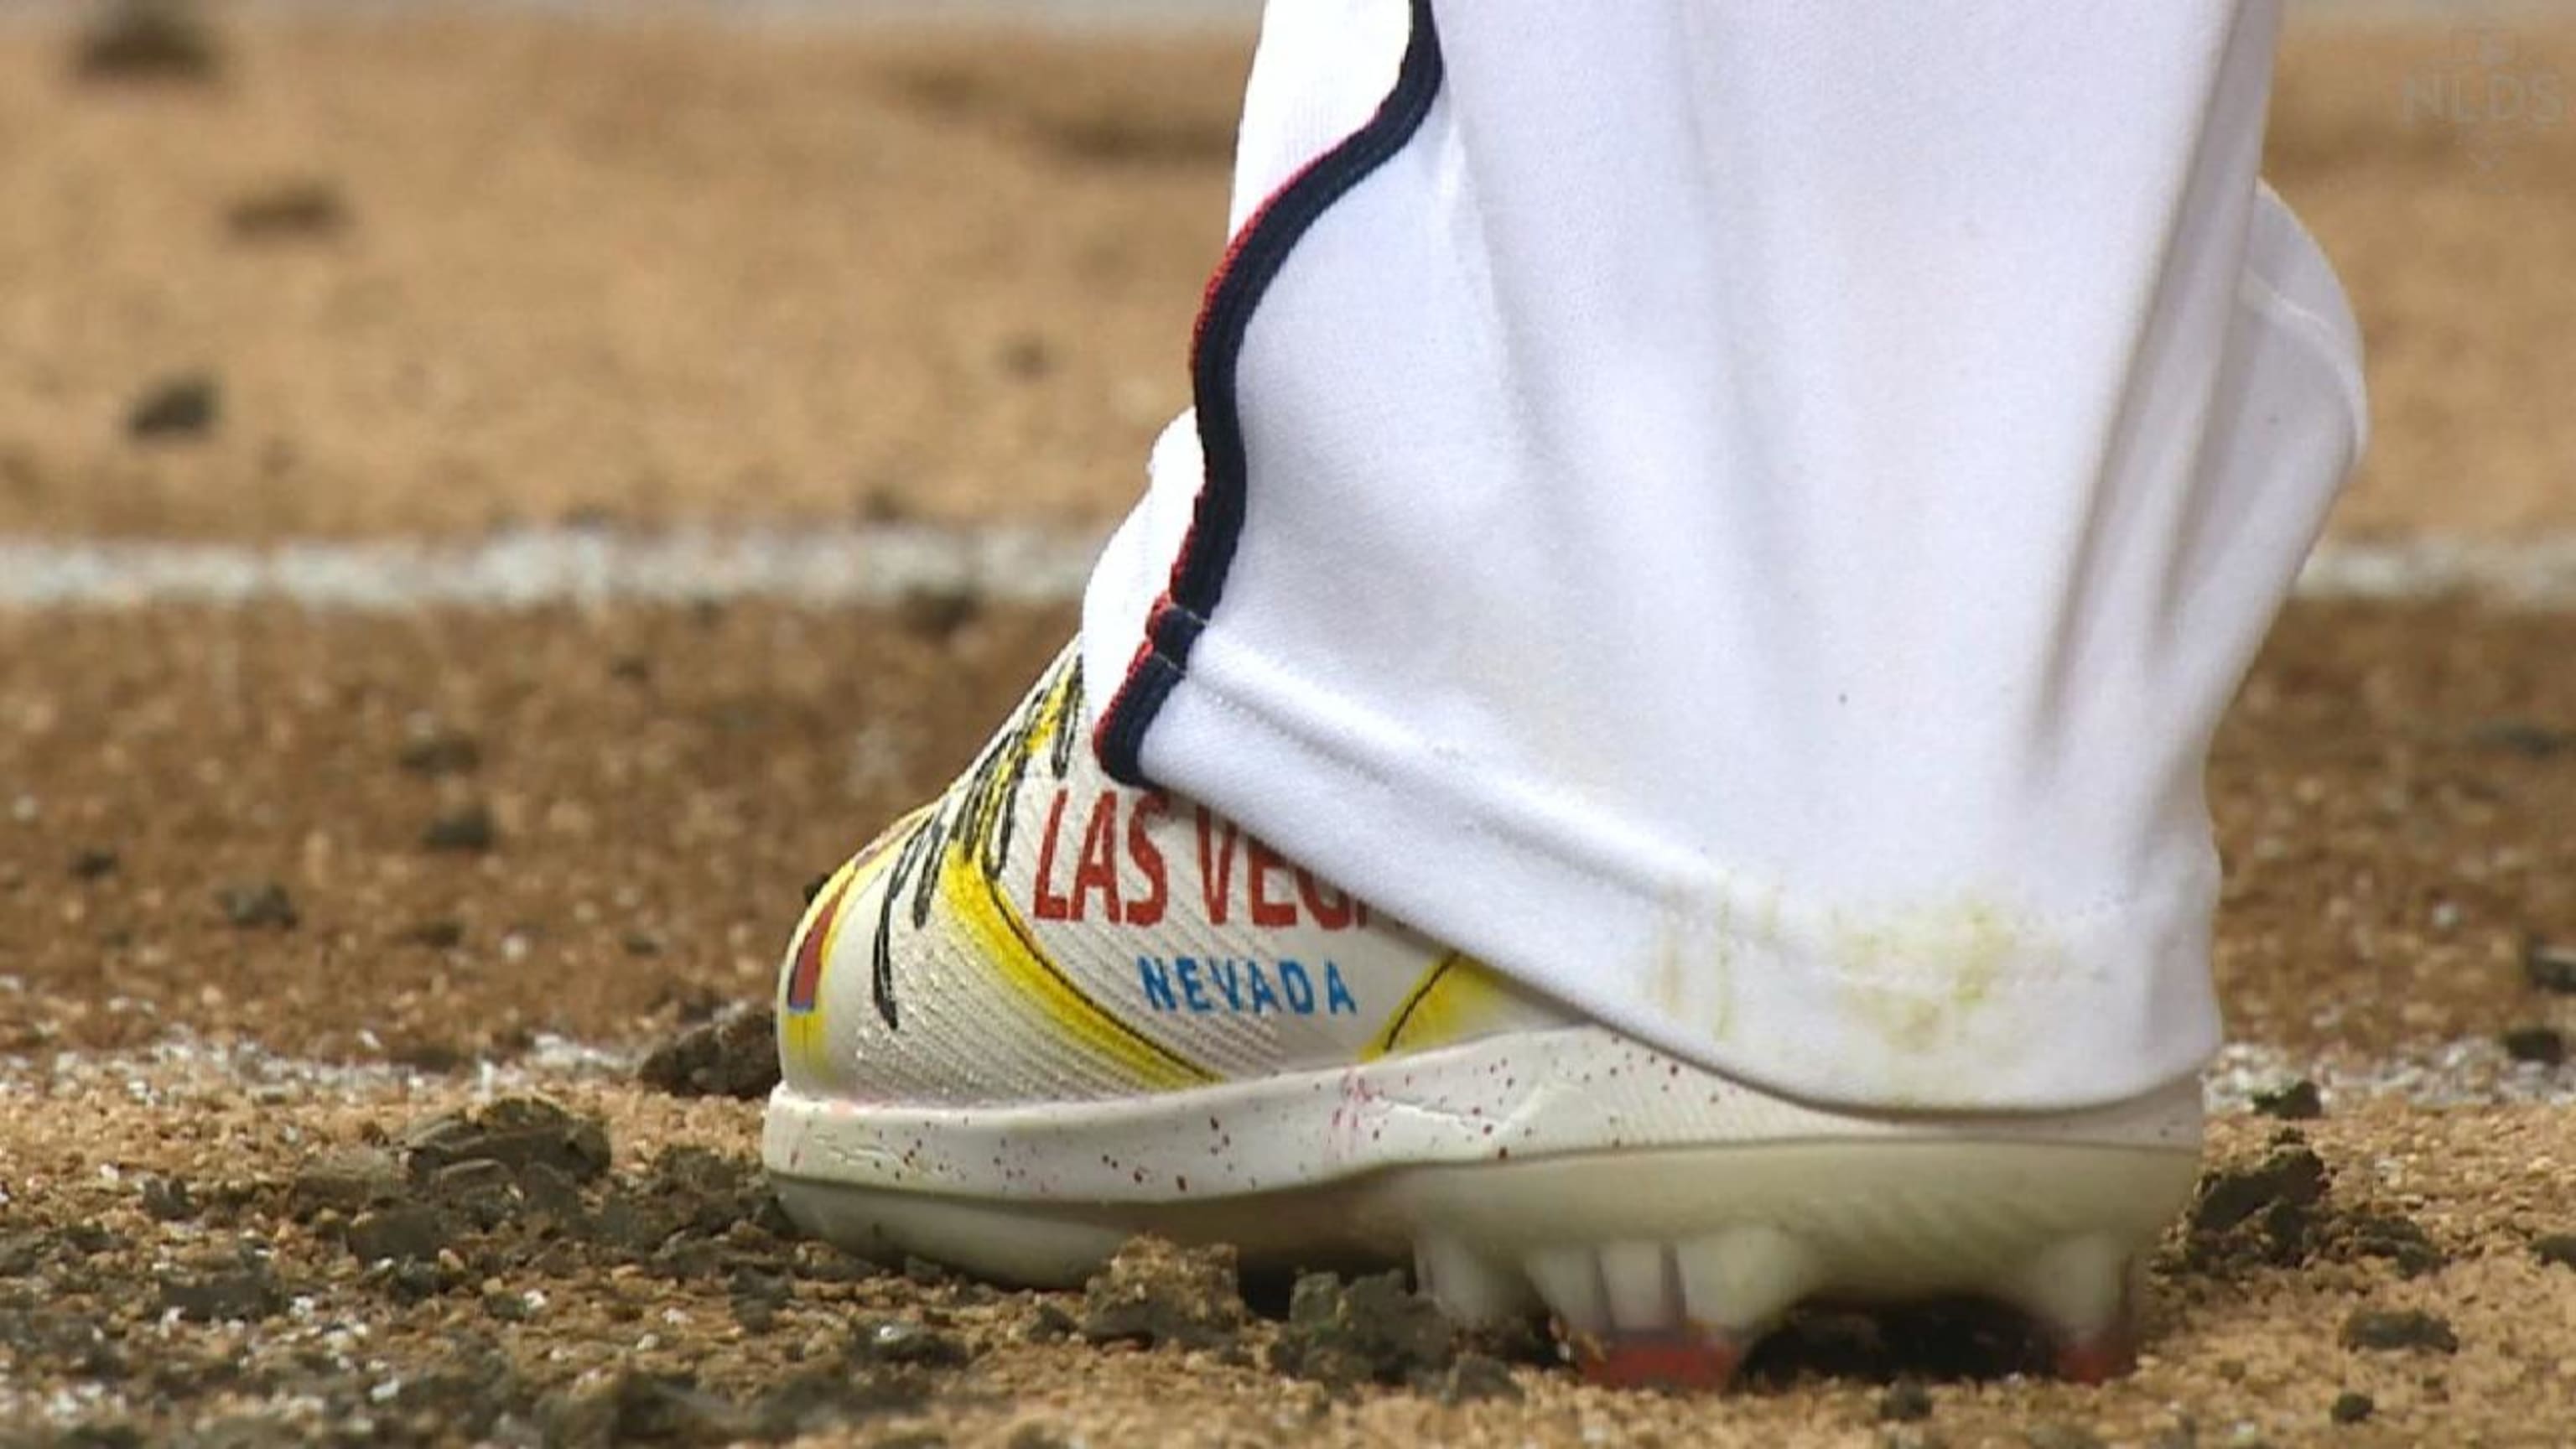 Bryce Harper debuted his custom Las Vegas cleats and promptly got a base  hit